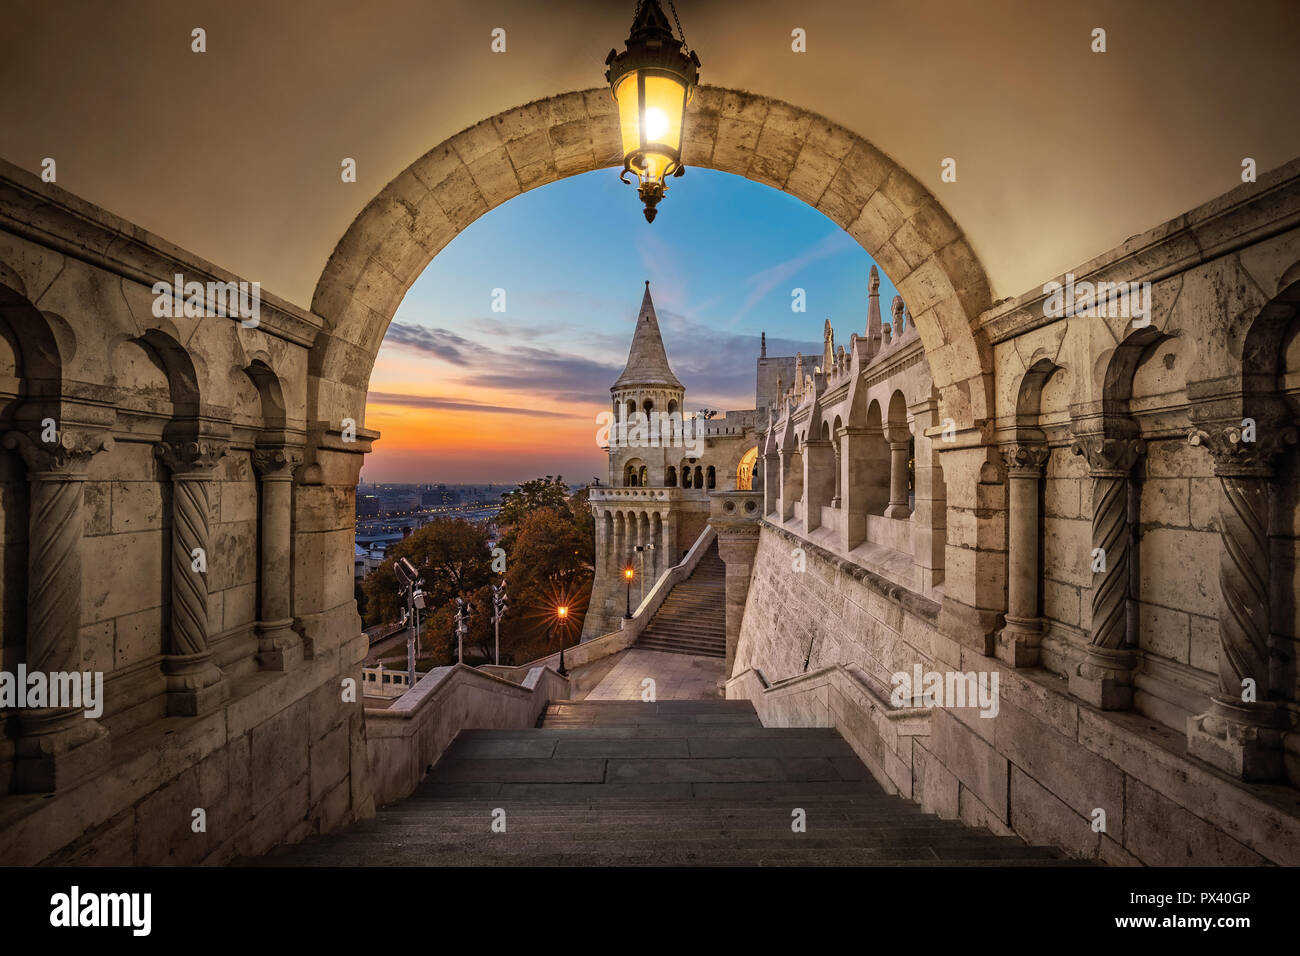 Budapest, Hungary - View on the ancient Fisherman's Bastion (Halaszbastya) at sunrise with beautiful sky and clouds Stock Photo